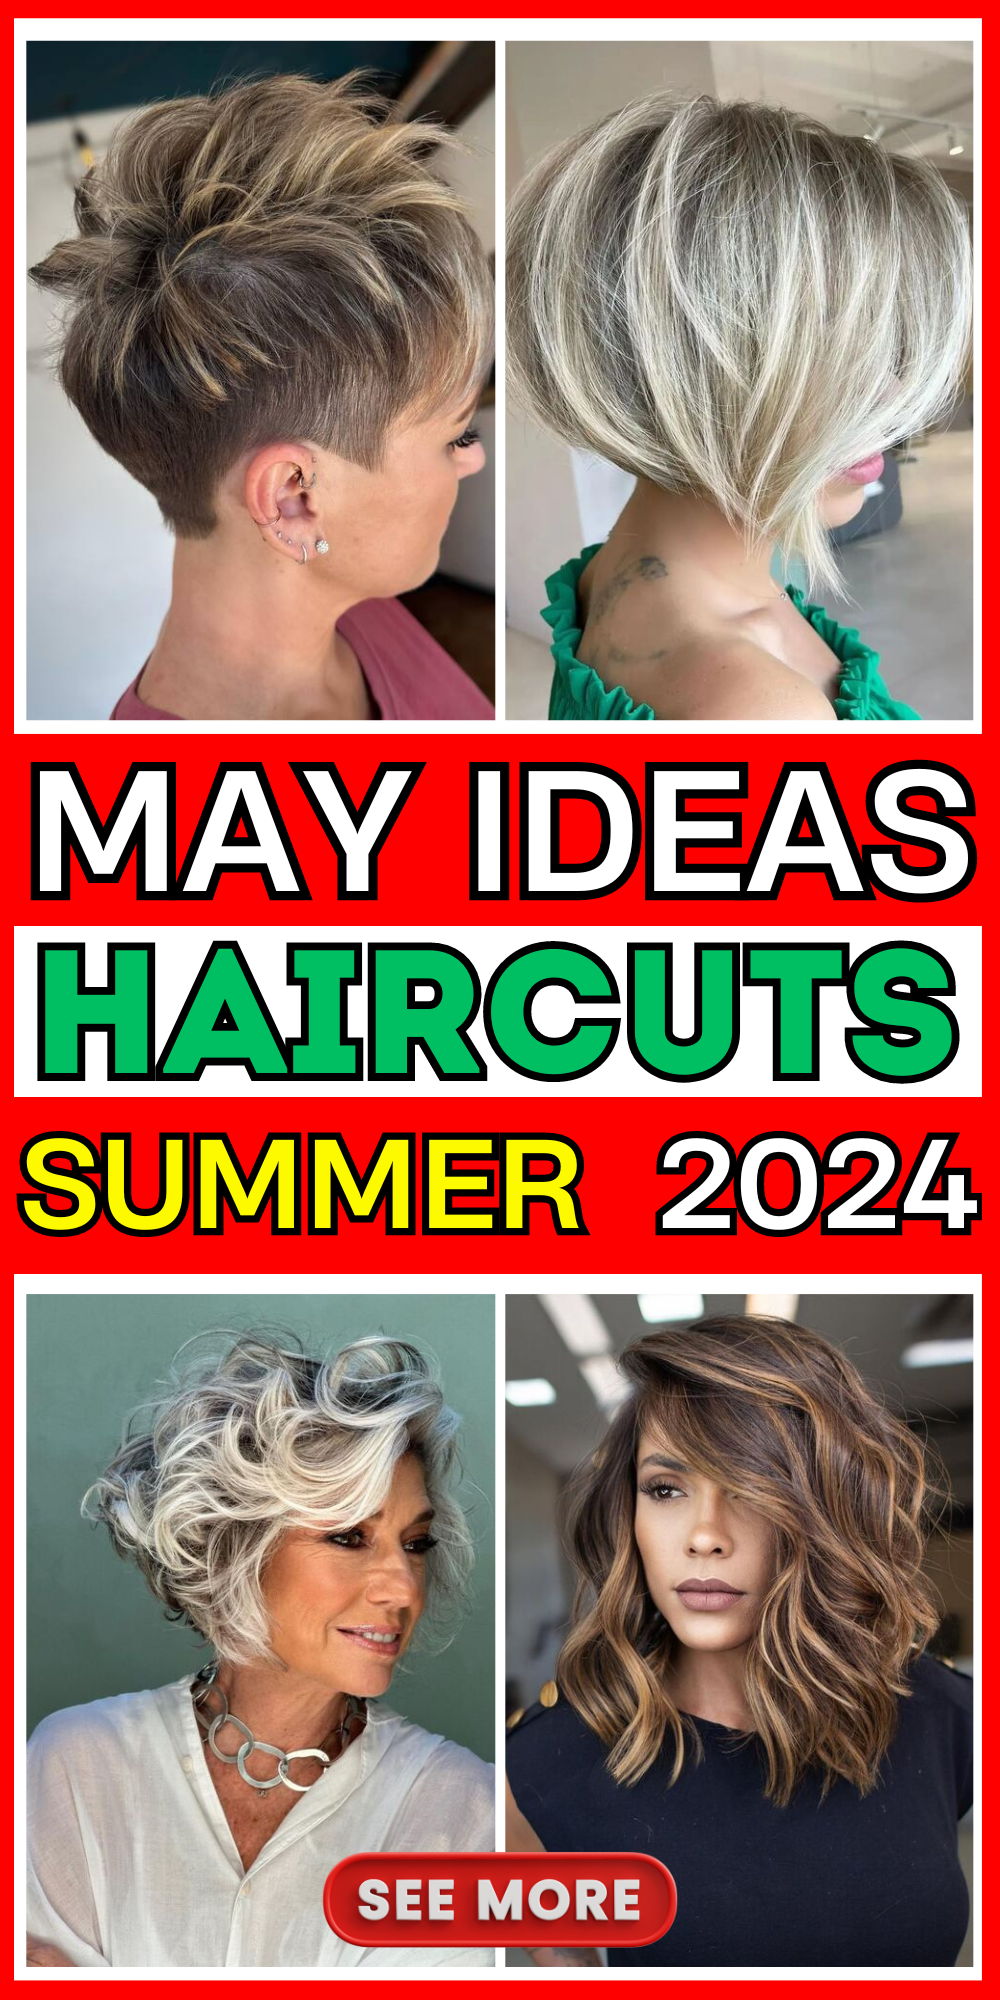 Vibrant May Hairstyles: Embrace Curls, Bobs, and Color Transformations